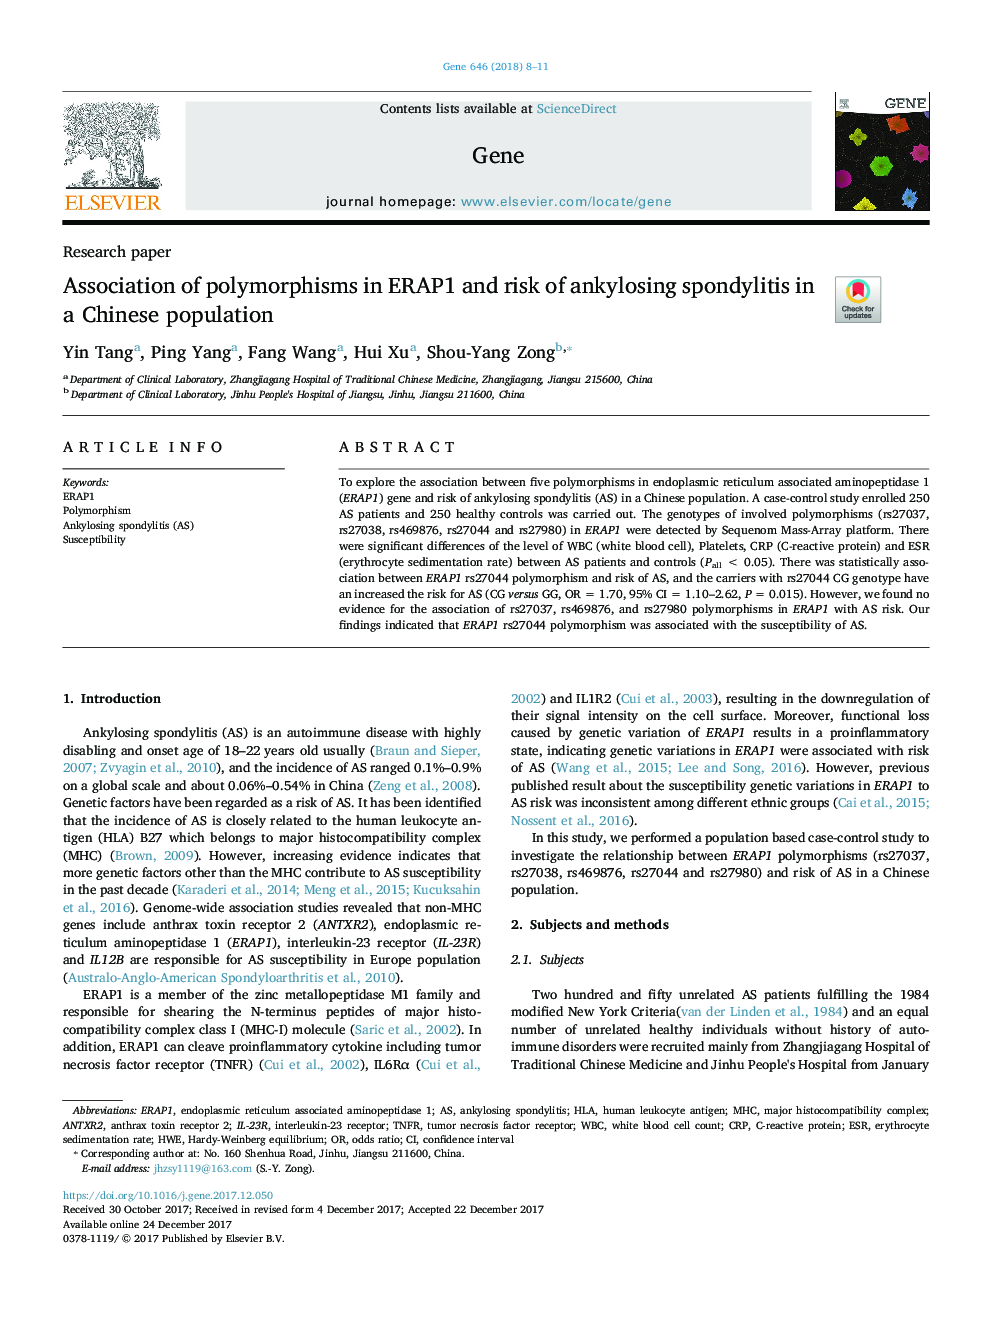 Association of polymorphisms in ERAP1 and risk of ankylosing spondylitis in a Chinese population